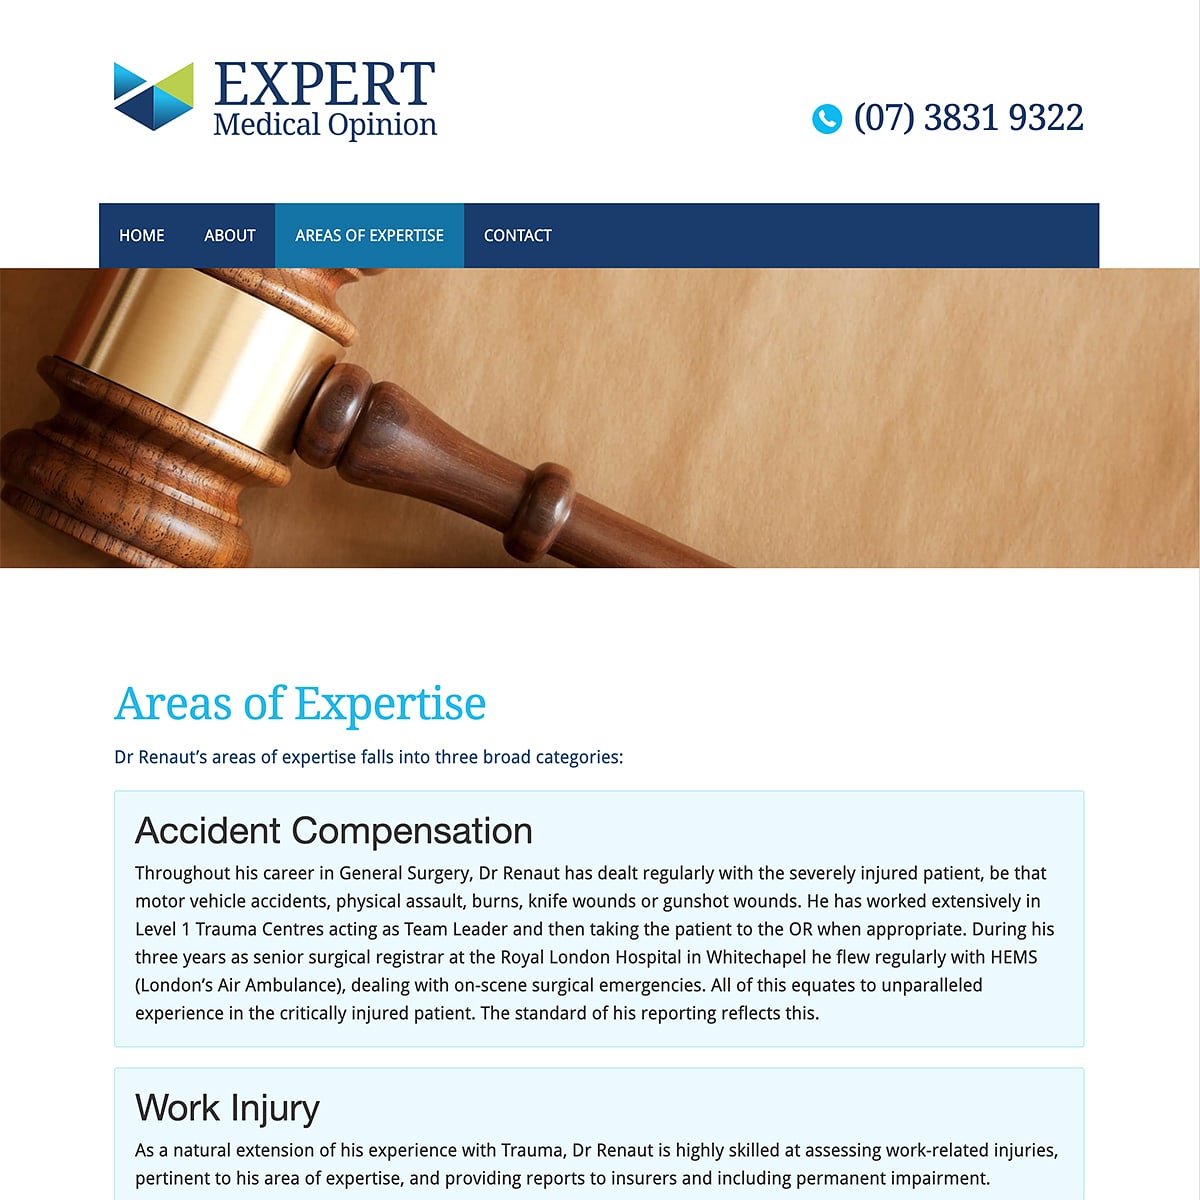 Expert Medical Opinion - Areas of Expertise